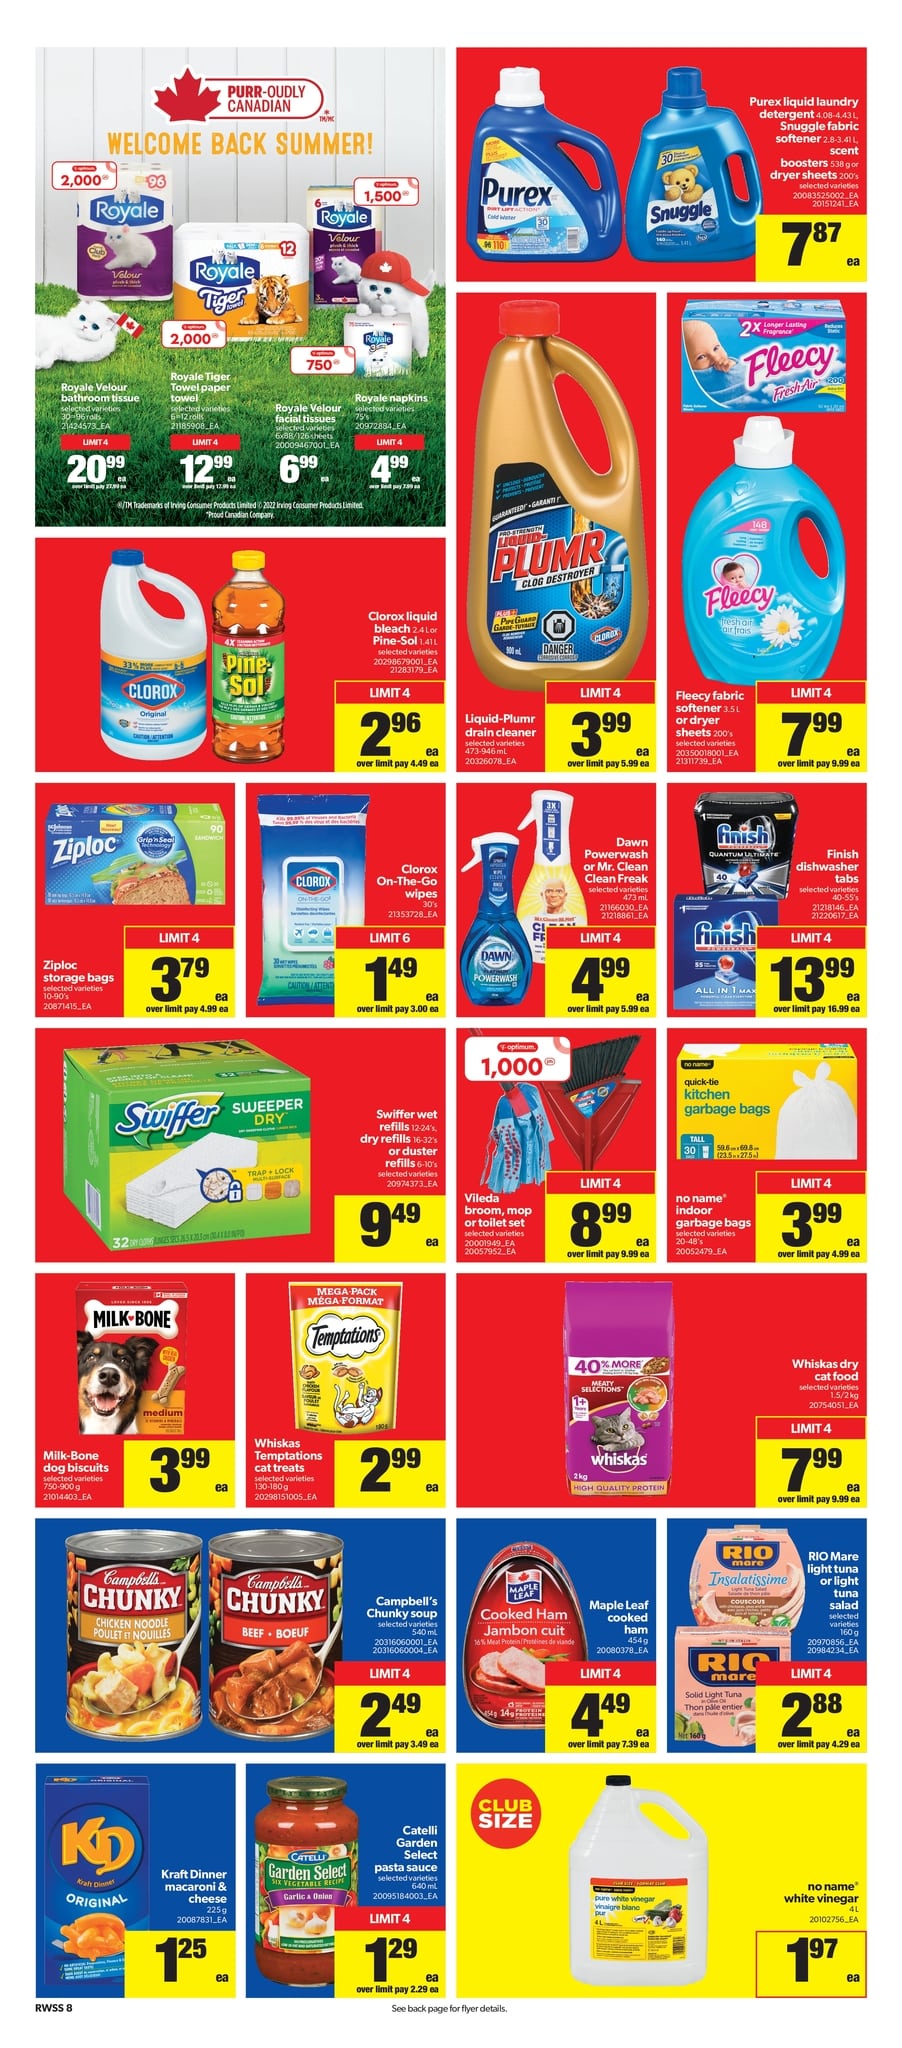 Real Canadian Superstore Western Canada - Weekly Flyer Specials - Page 9